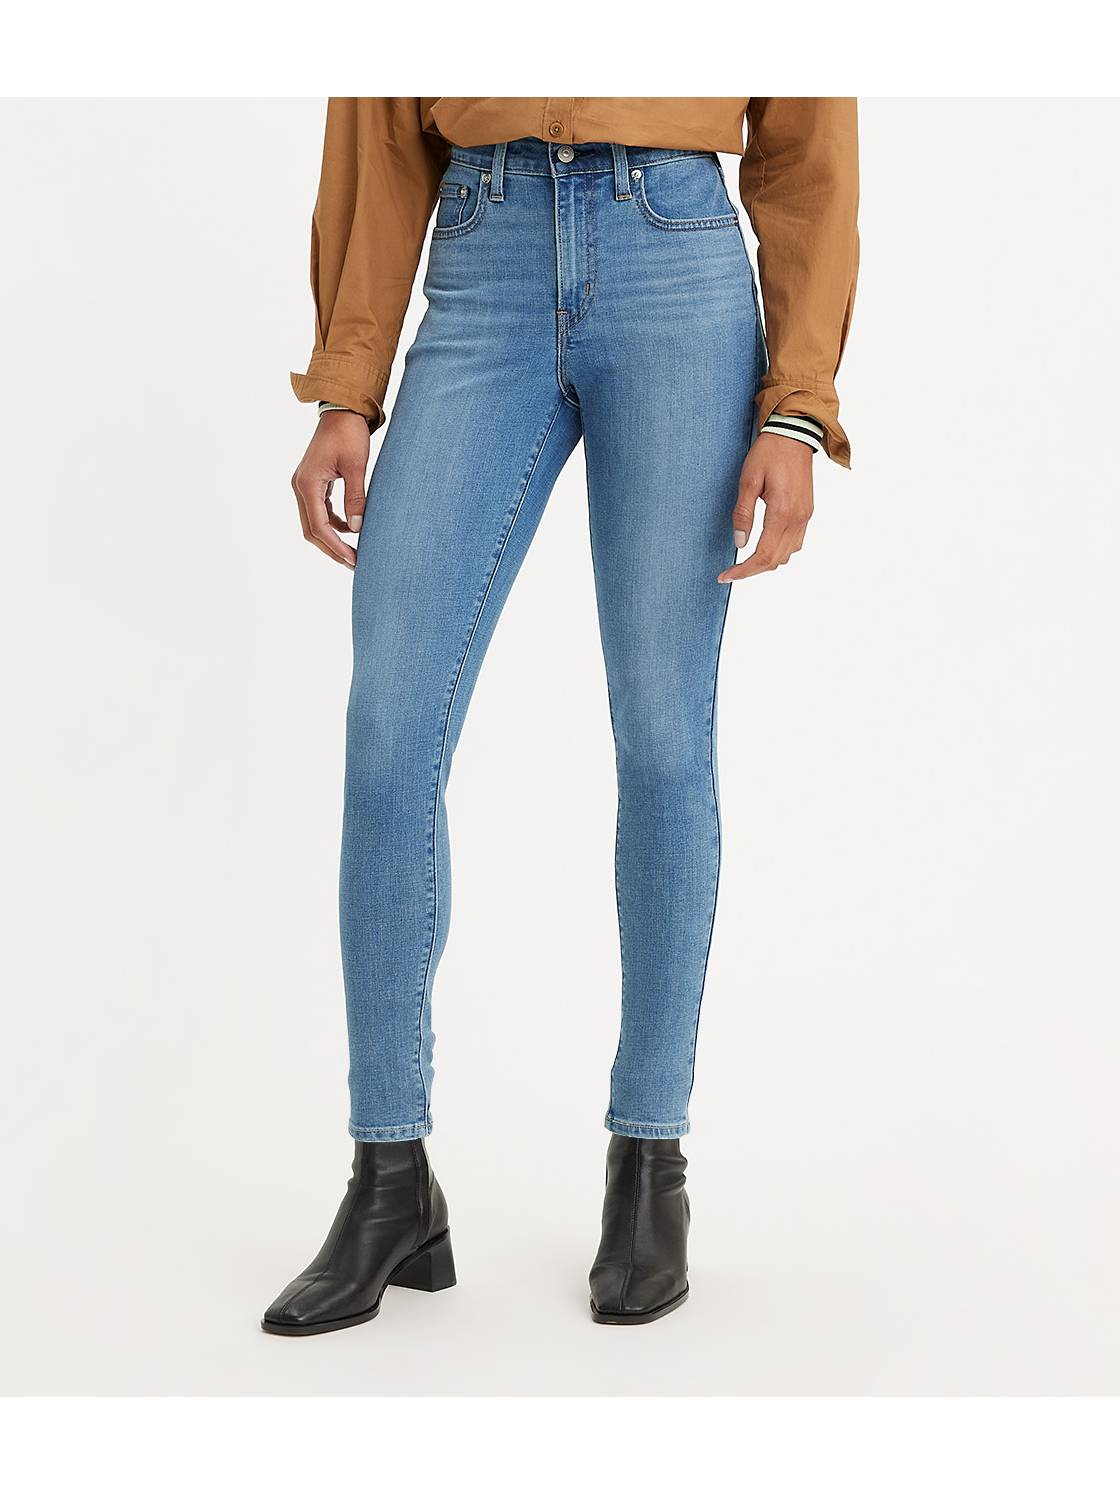 click weapon Opposite 700 Series Jeans - Stretch Jeans for Women | Levi's® US